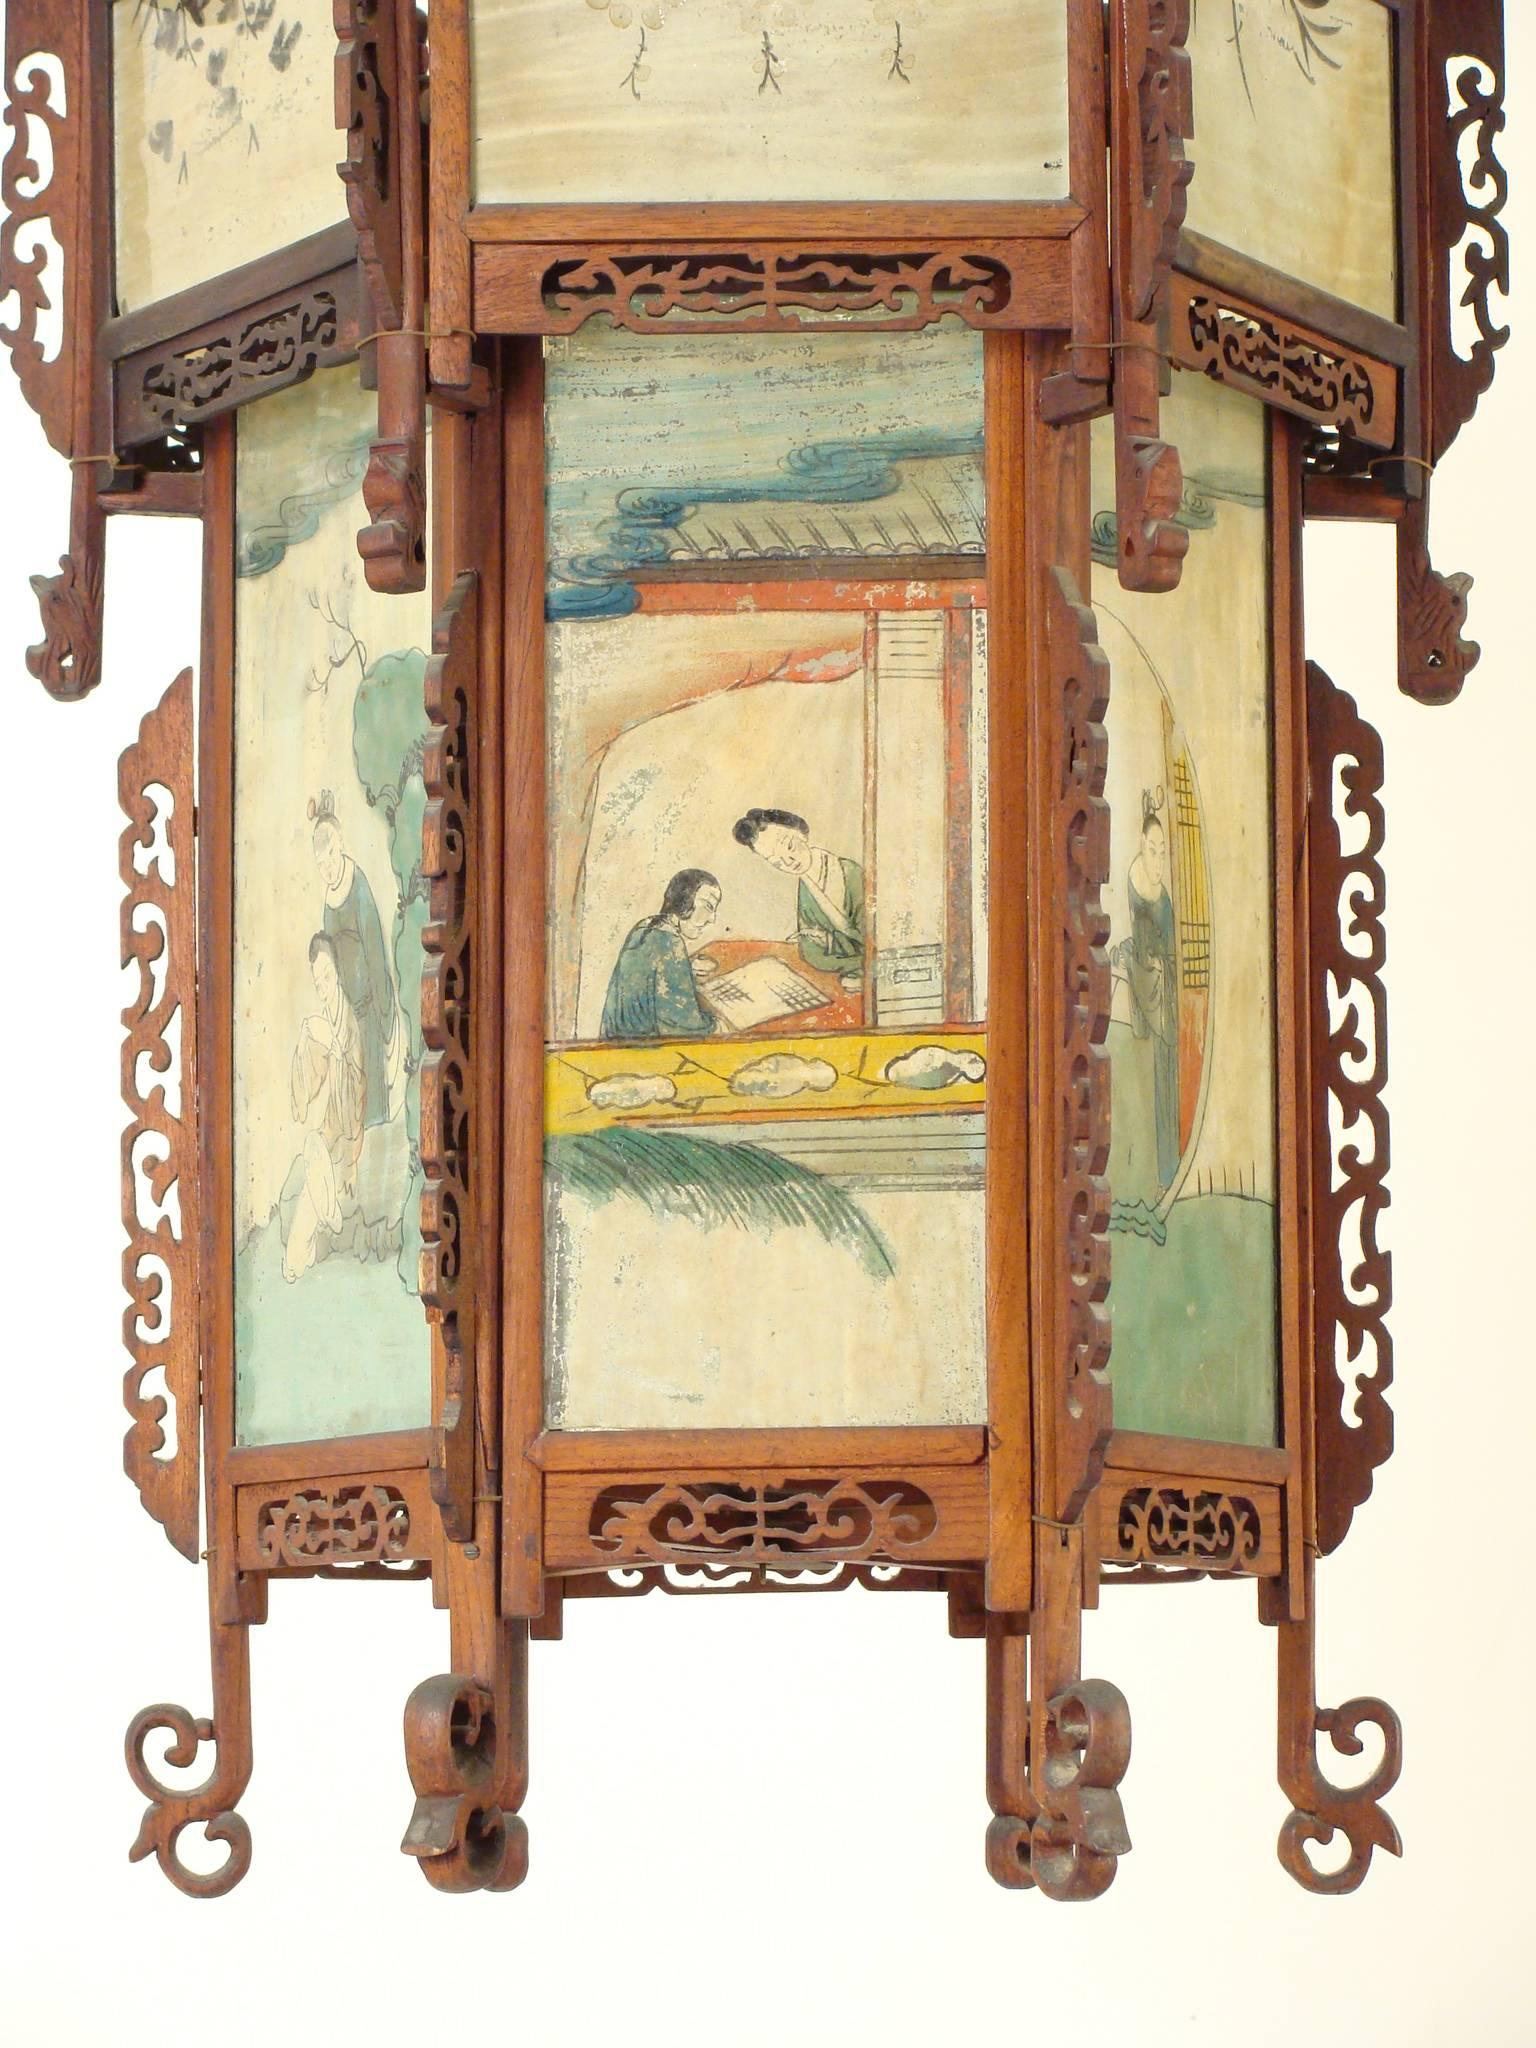 Chinese lantern with églomisé glass panels, circa 1940. This is a very colorful and decorative lantern with stylized wood carved dragons and églomisé glass panels.